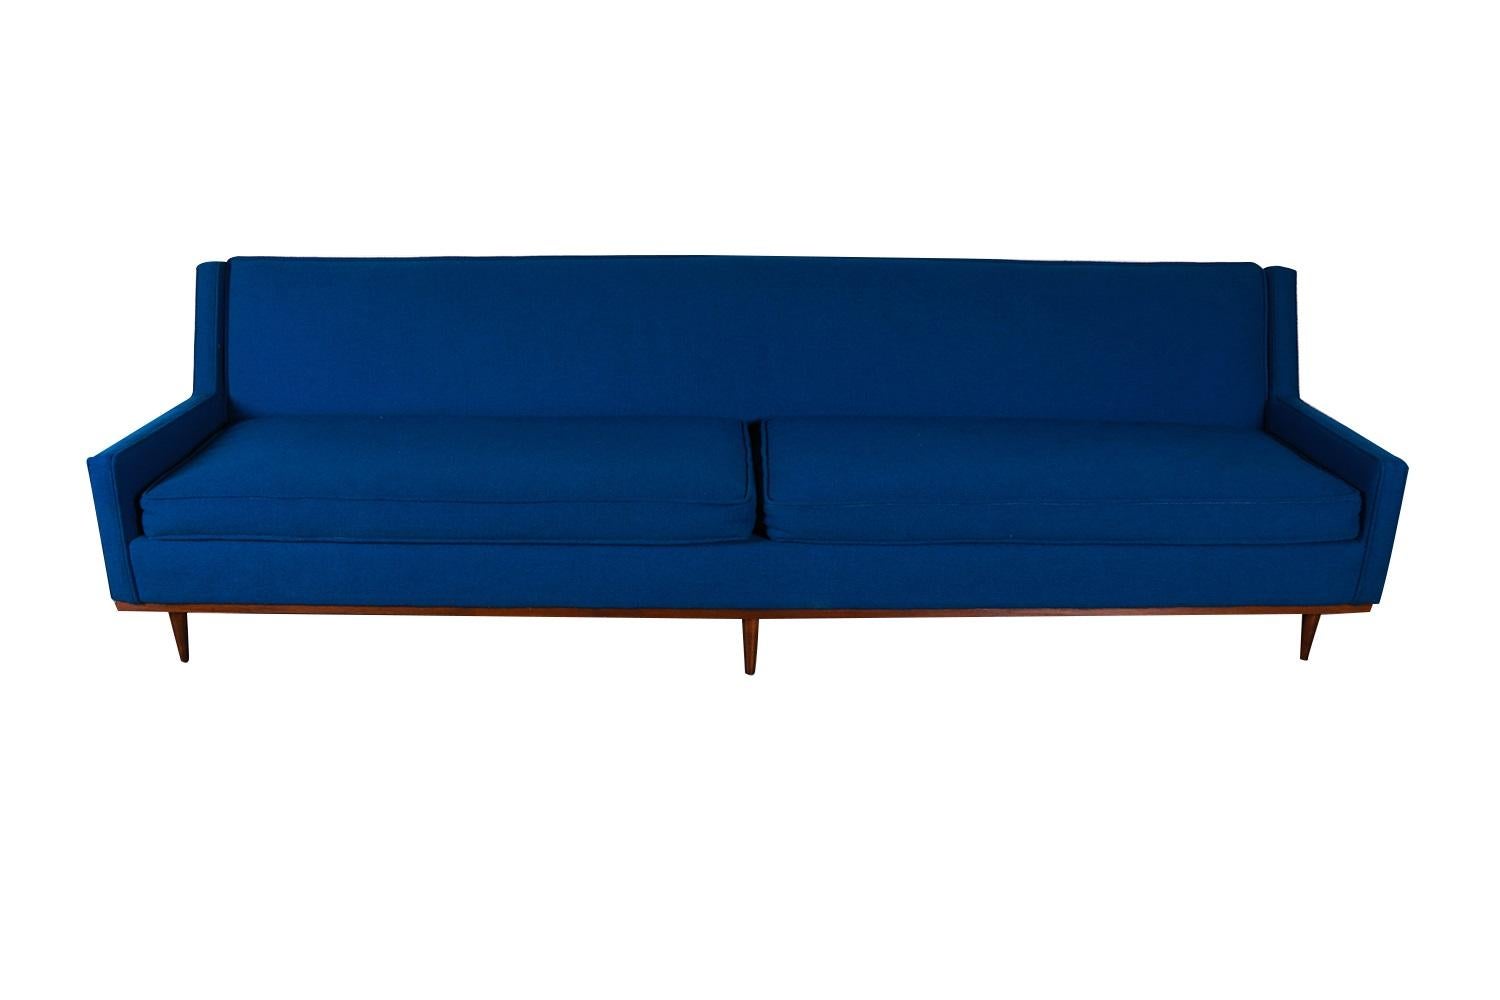 A very attractive two-seater sofa. Distinctive early mid century modern design shows Danish influence. Features original electric cobalt blue upholstery, two removable zippered seat cushions that are well intact. The tight back and clean modern